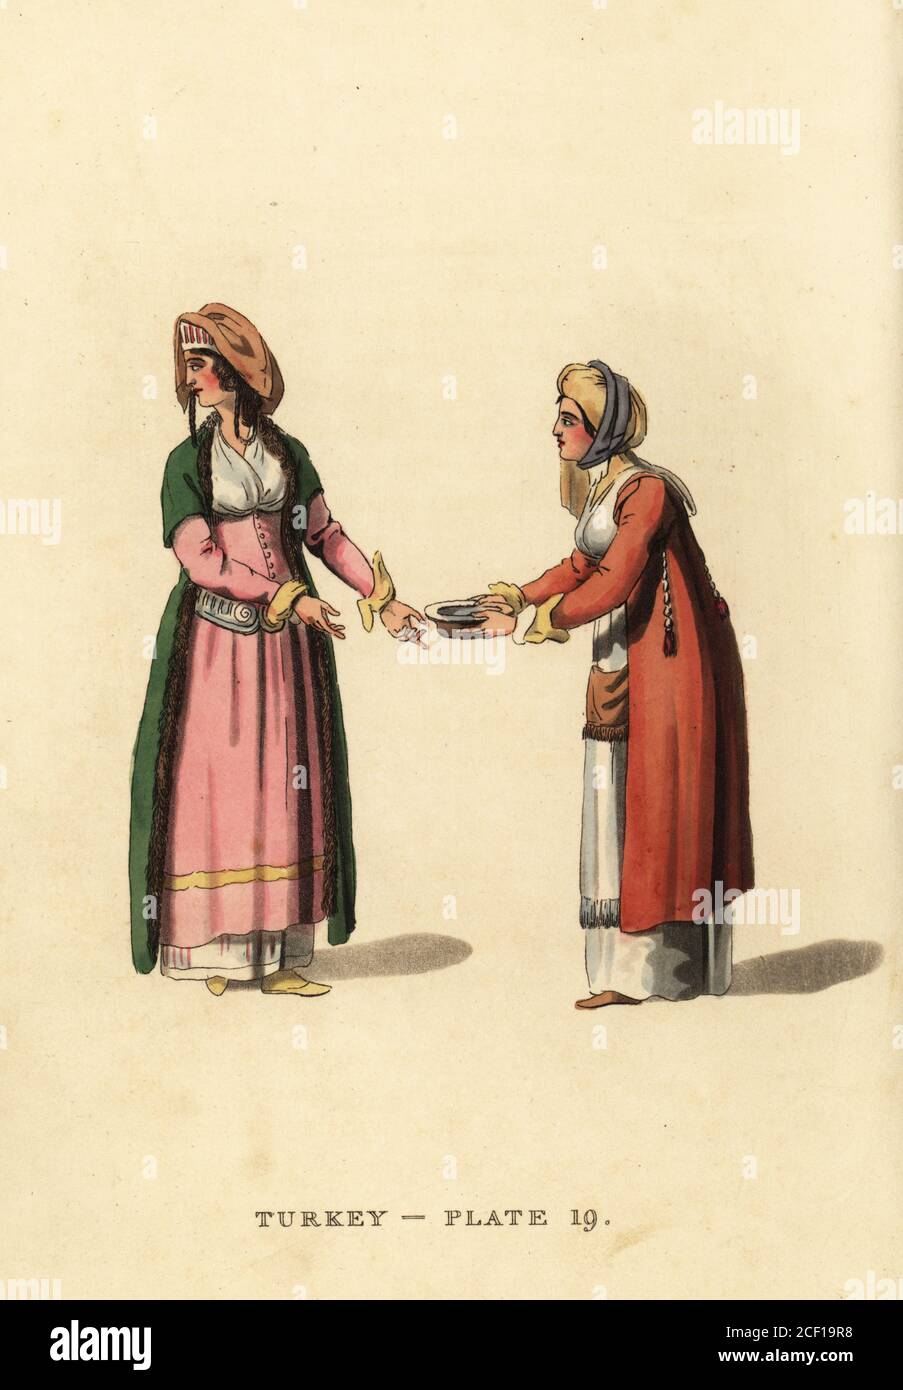 Women of the Island of Andros, Greek Cyclades archipelago. They wear turbans, coats and long robes. Handcoloured copperplate engraving after Octavian Dalvimart from William Alexander’s translation of Picturesque Representations of the Dress and Manners of the Turks, Thomas M’Lean, London, 1814. Stock Photo